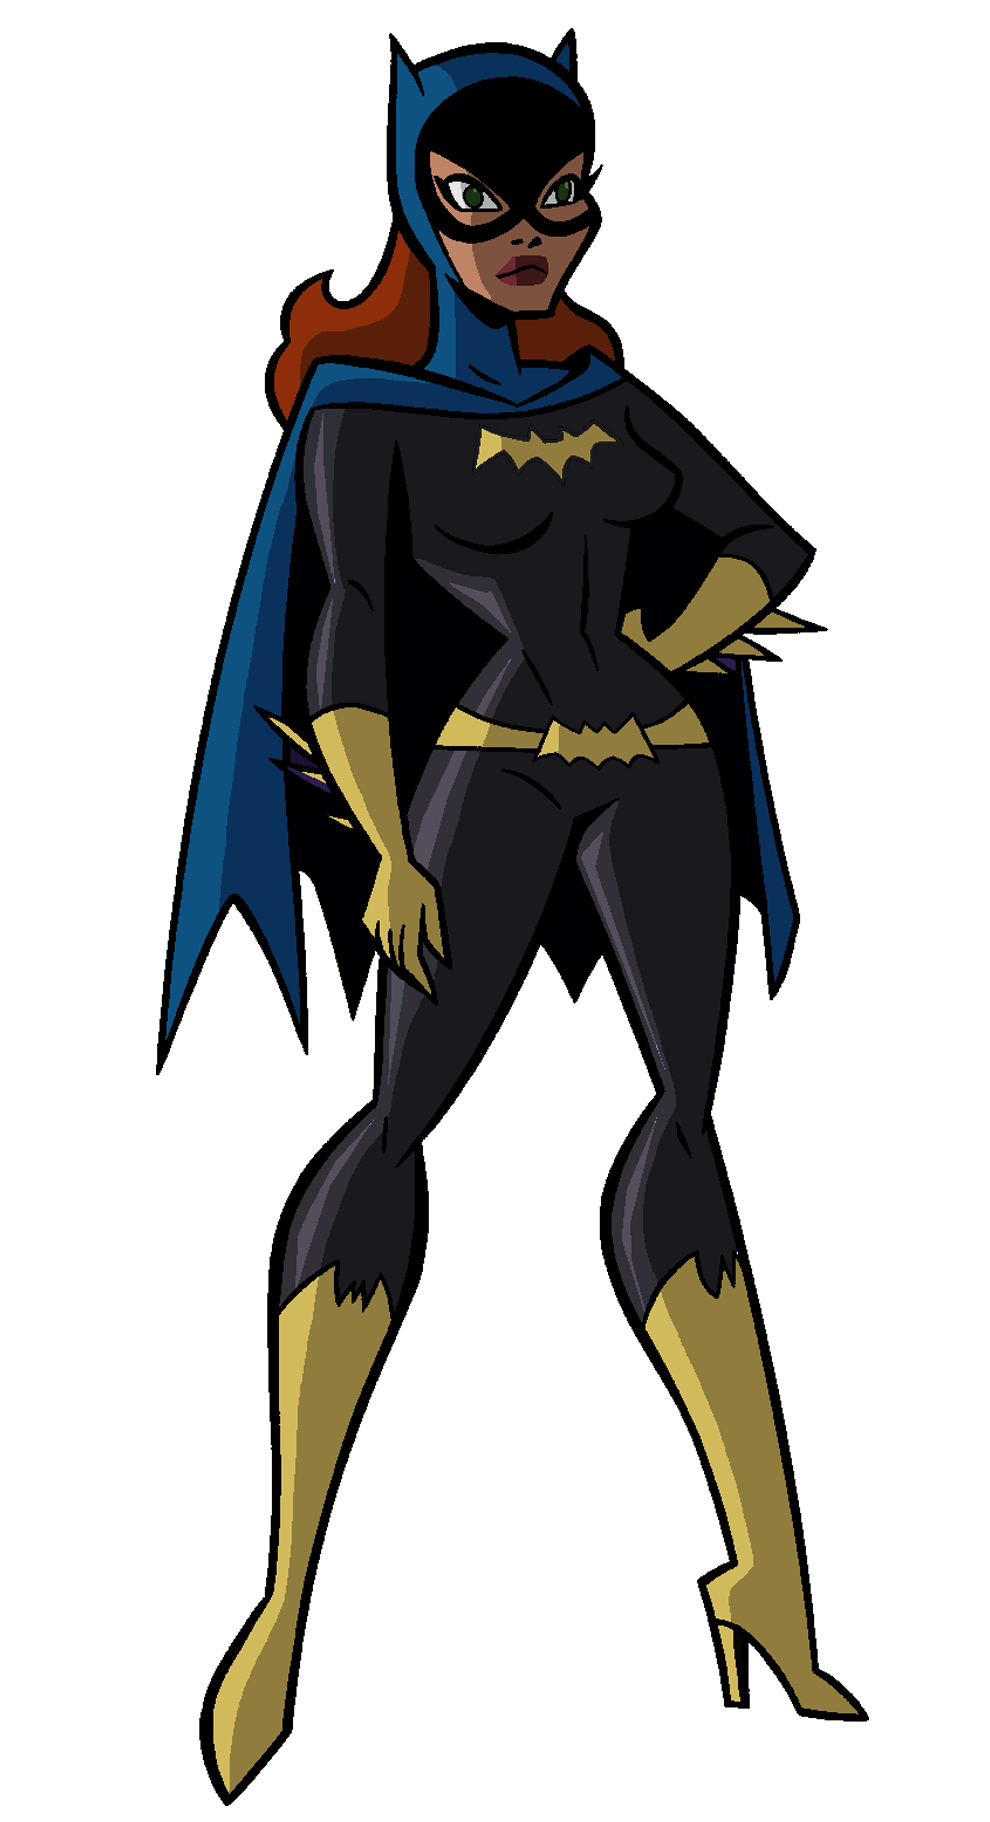 Batgirl from Batman: The Brave and the Bold by SpawnofSprang on DeviantArt